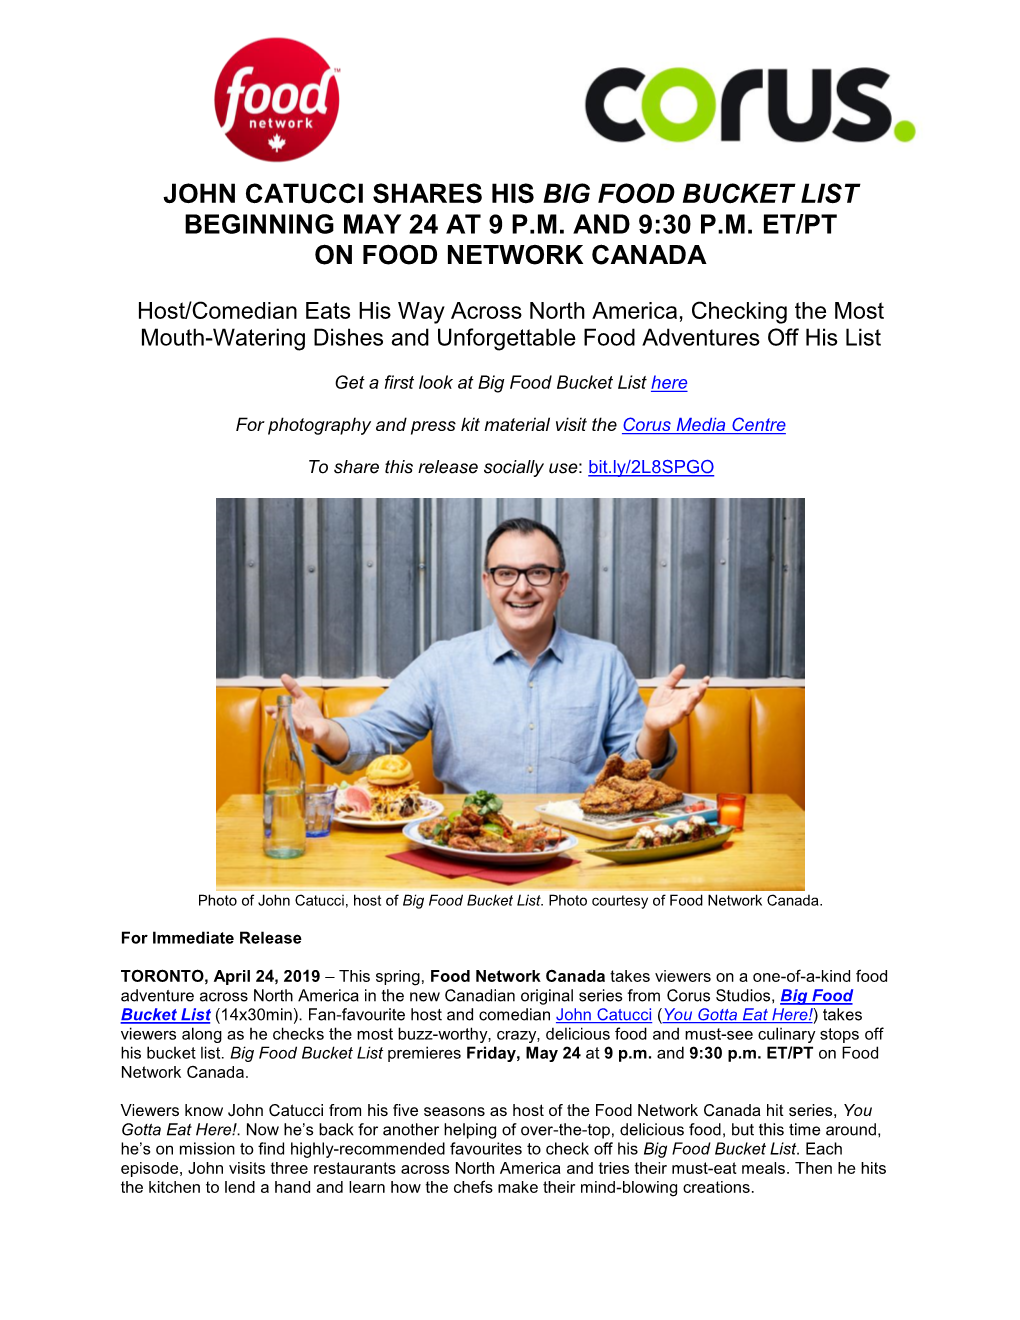 John Catucci Shares His Big Food Bucket List Beginning May 24 at 9 P.M. and 9:30 P.M. Et/Pt on Food Network Canada